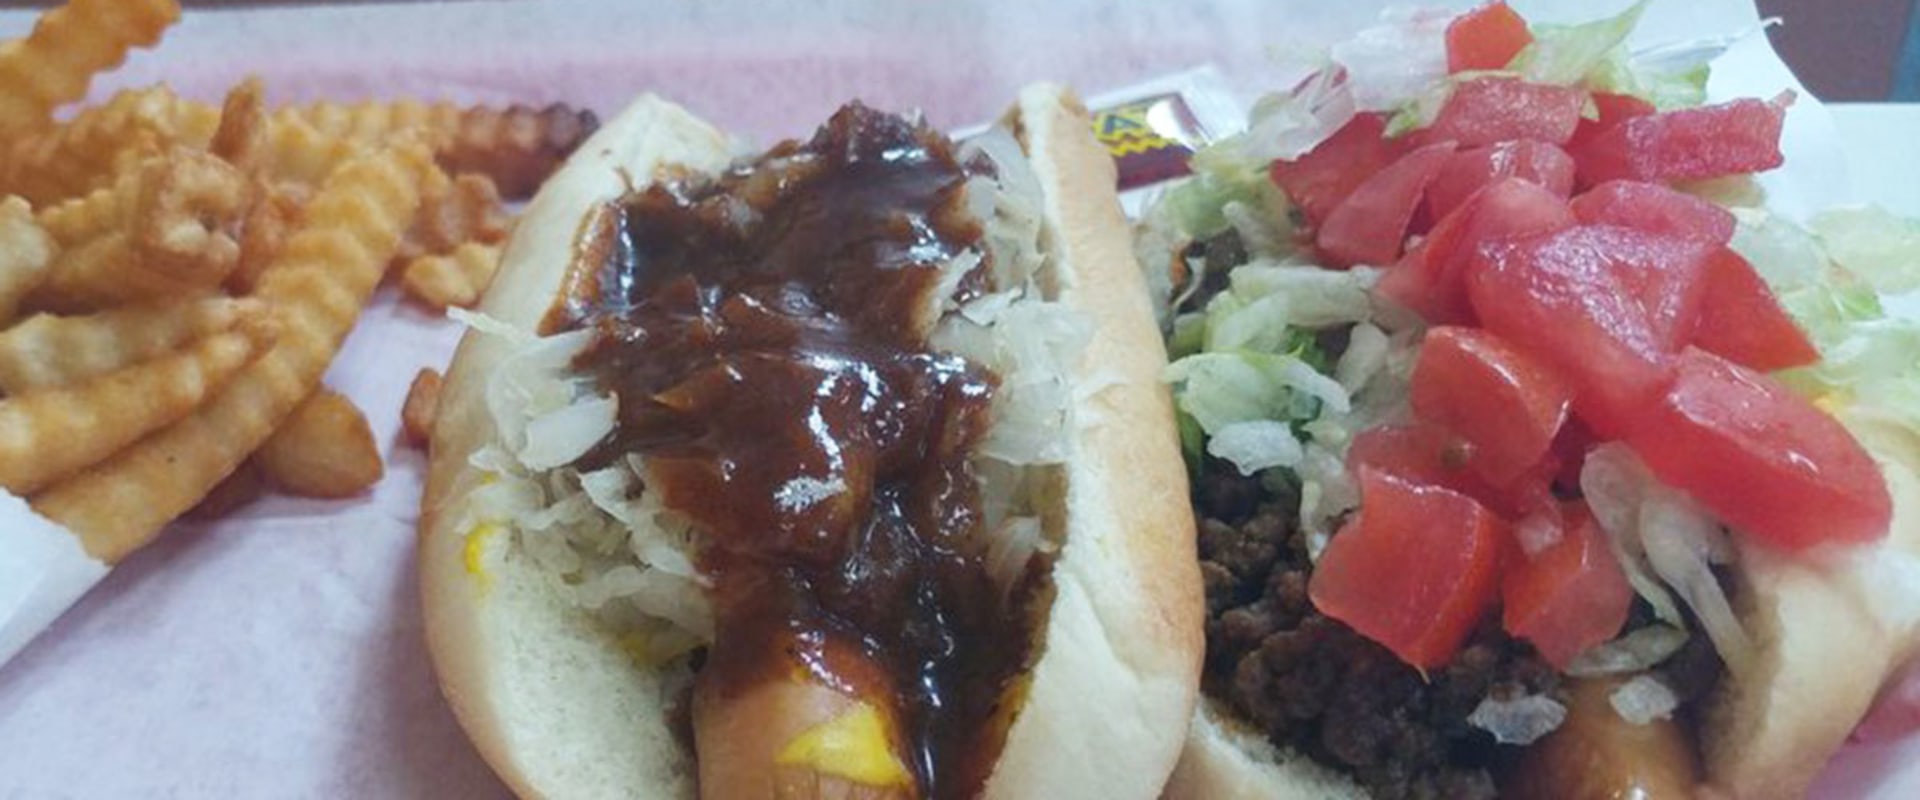 Vegetarian Hot Dogs: Ranking the Best and Worst in Lee County, FL